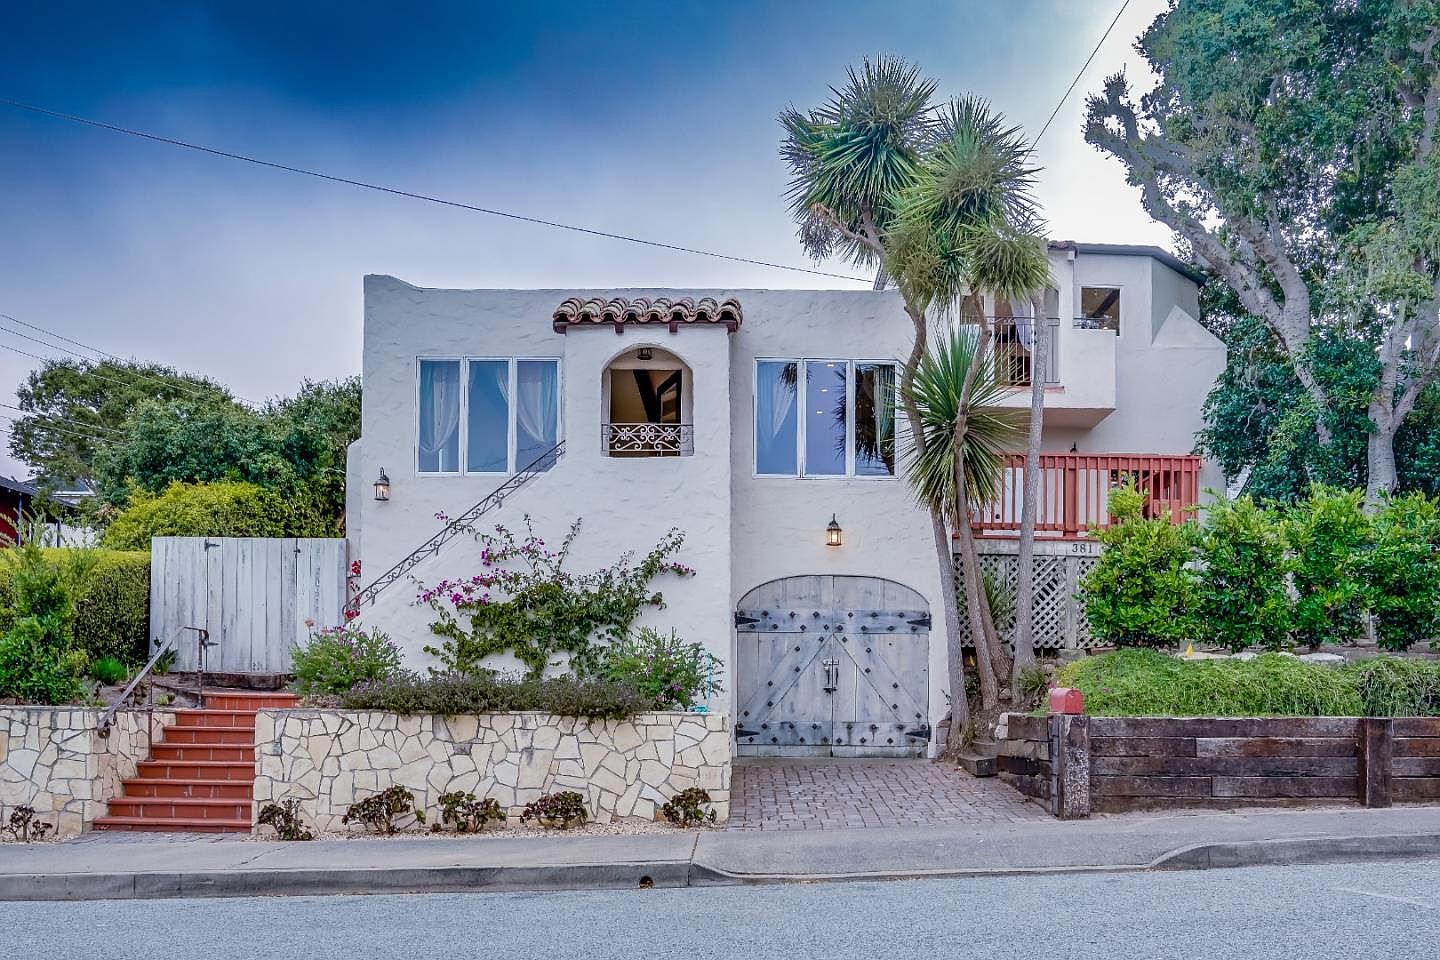 Recently Sold Homes in Pacific Grove CA - 710 Transactions - Zillow